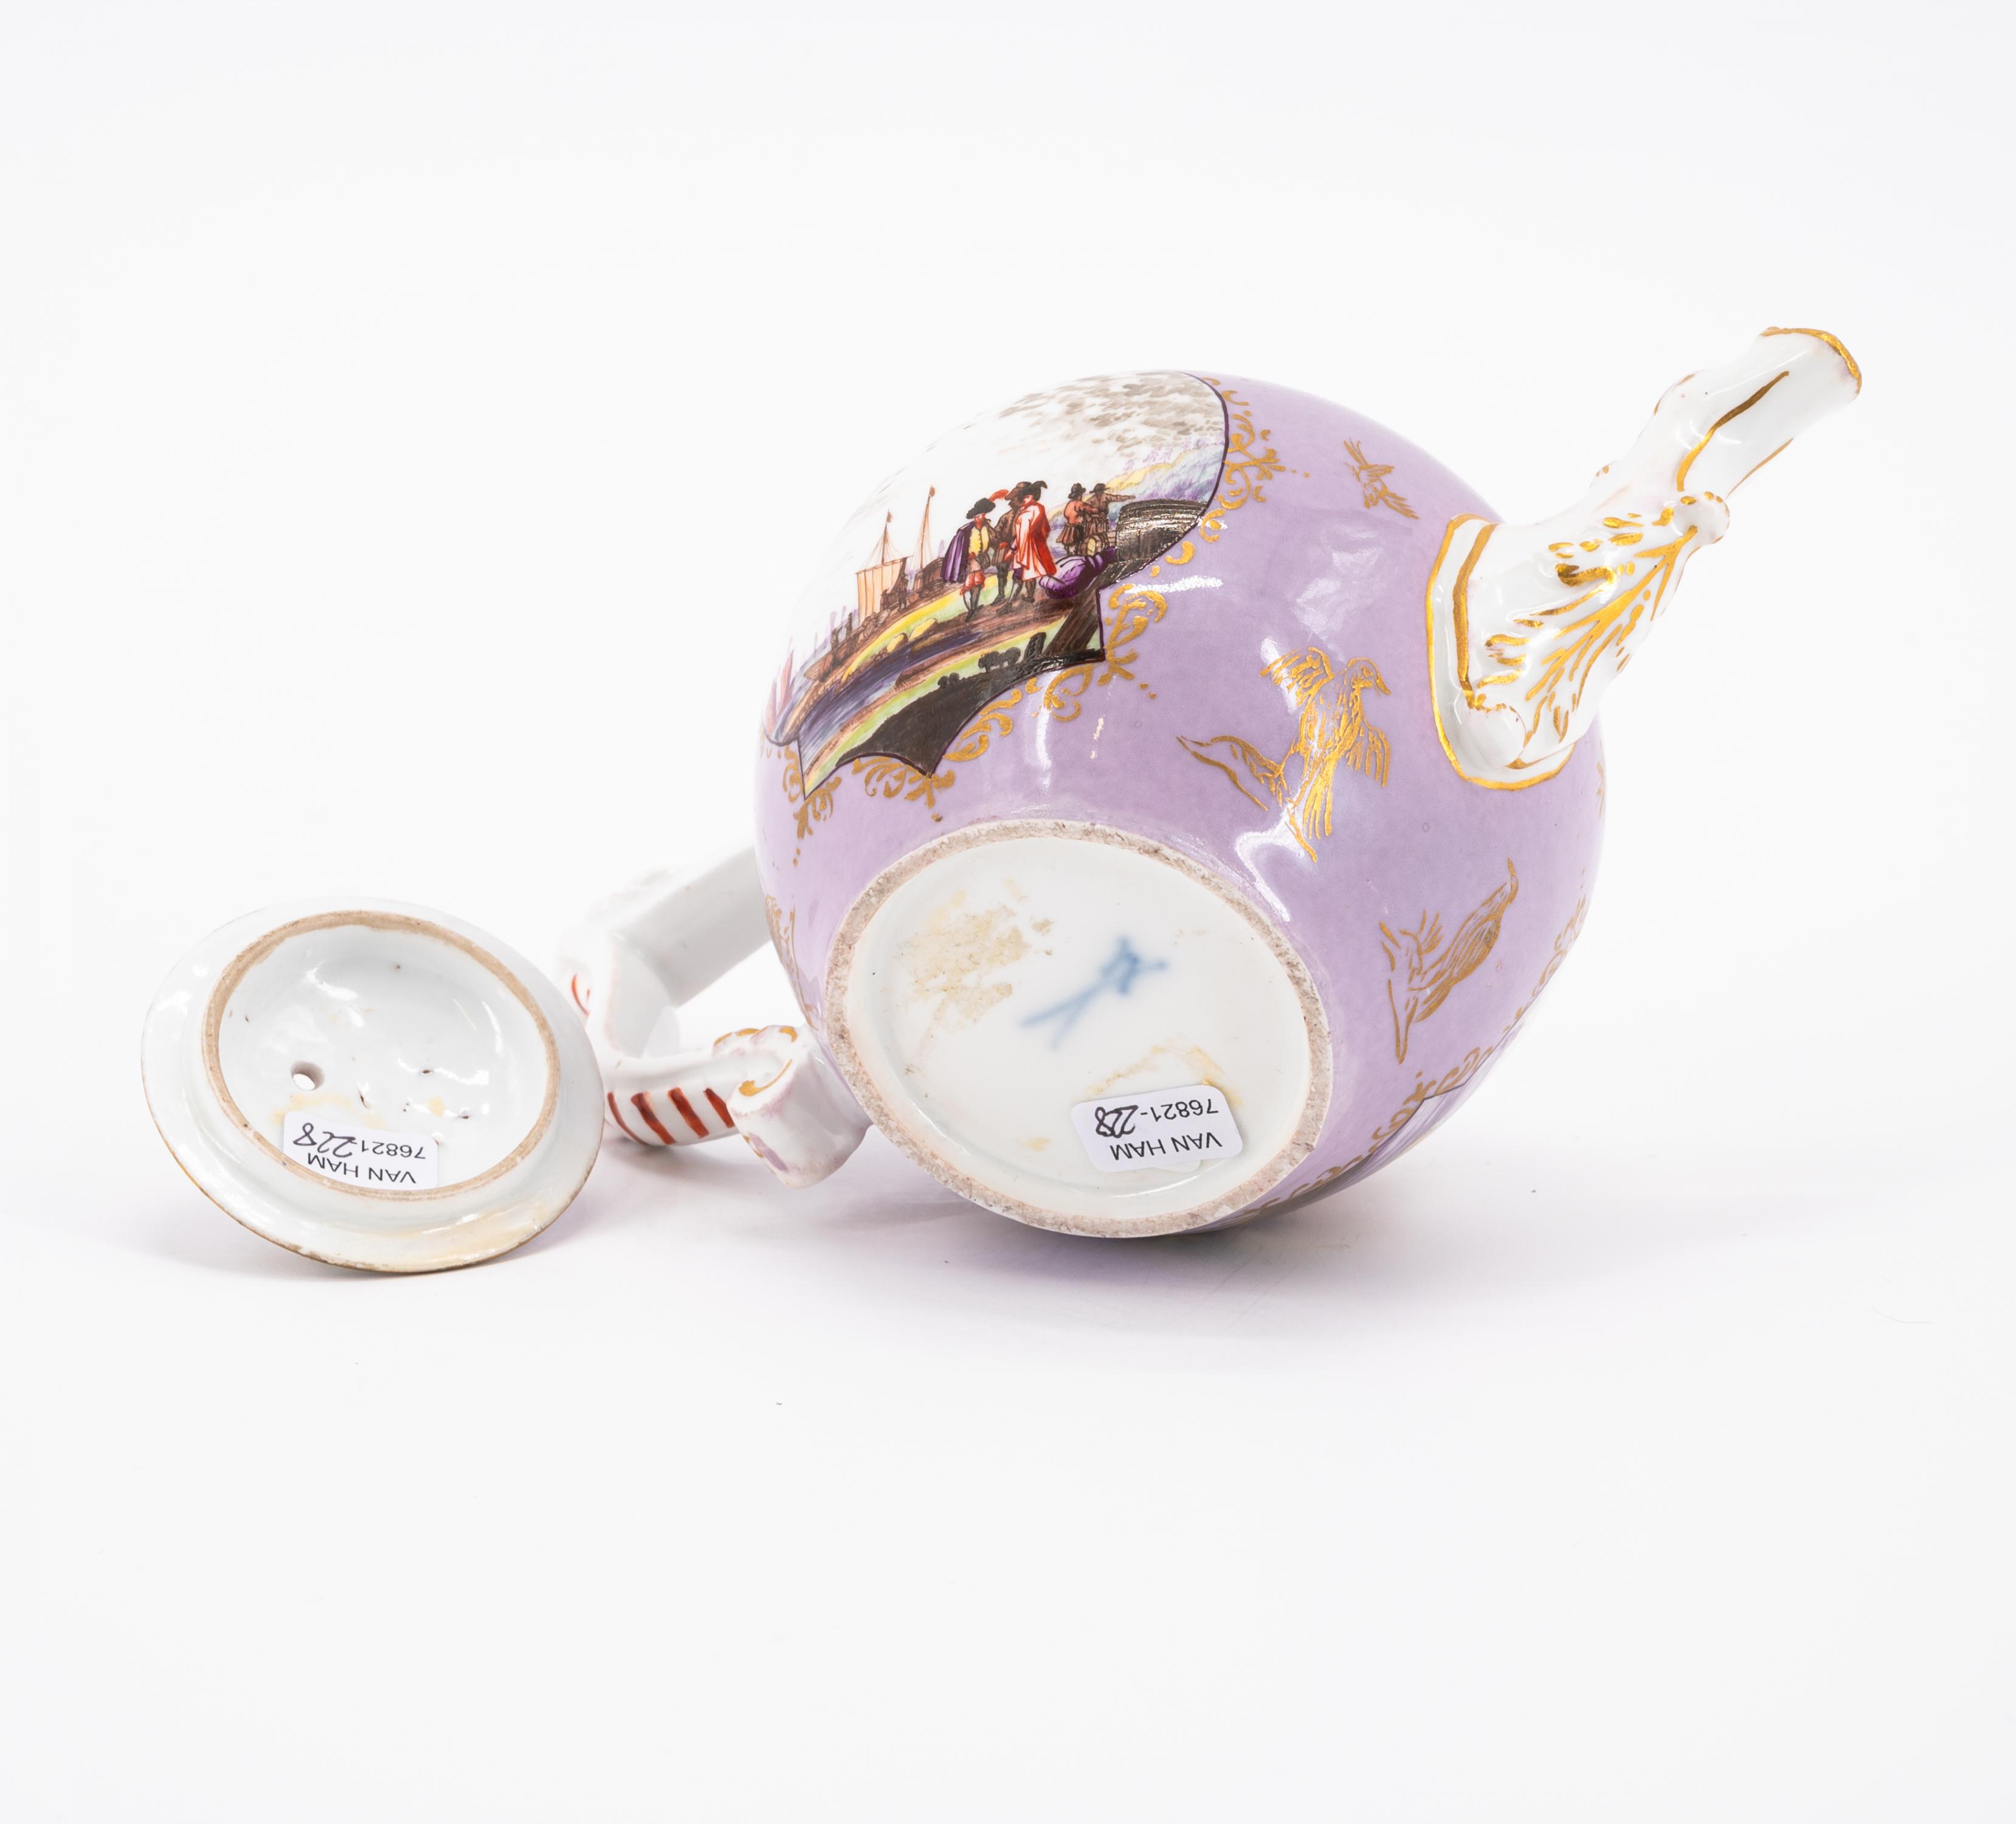 PORCELAIN TEAPOT AND COFFEEPOT WITH PURPLE GROUND AND MERCHANTS NAVY SCENES - Image 11 of 11